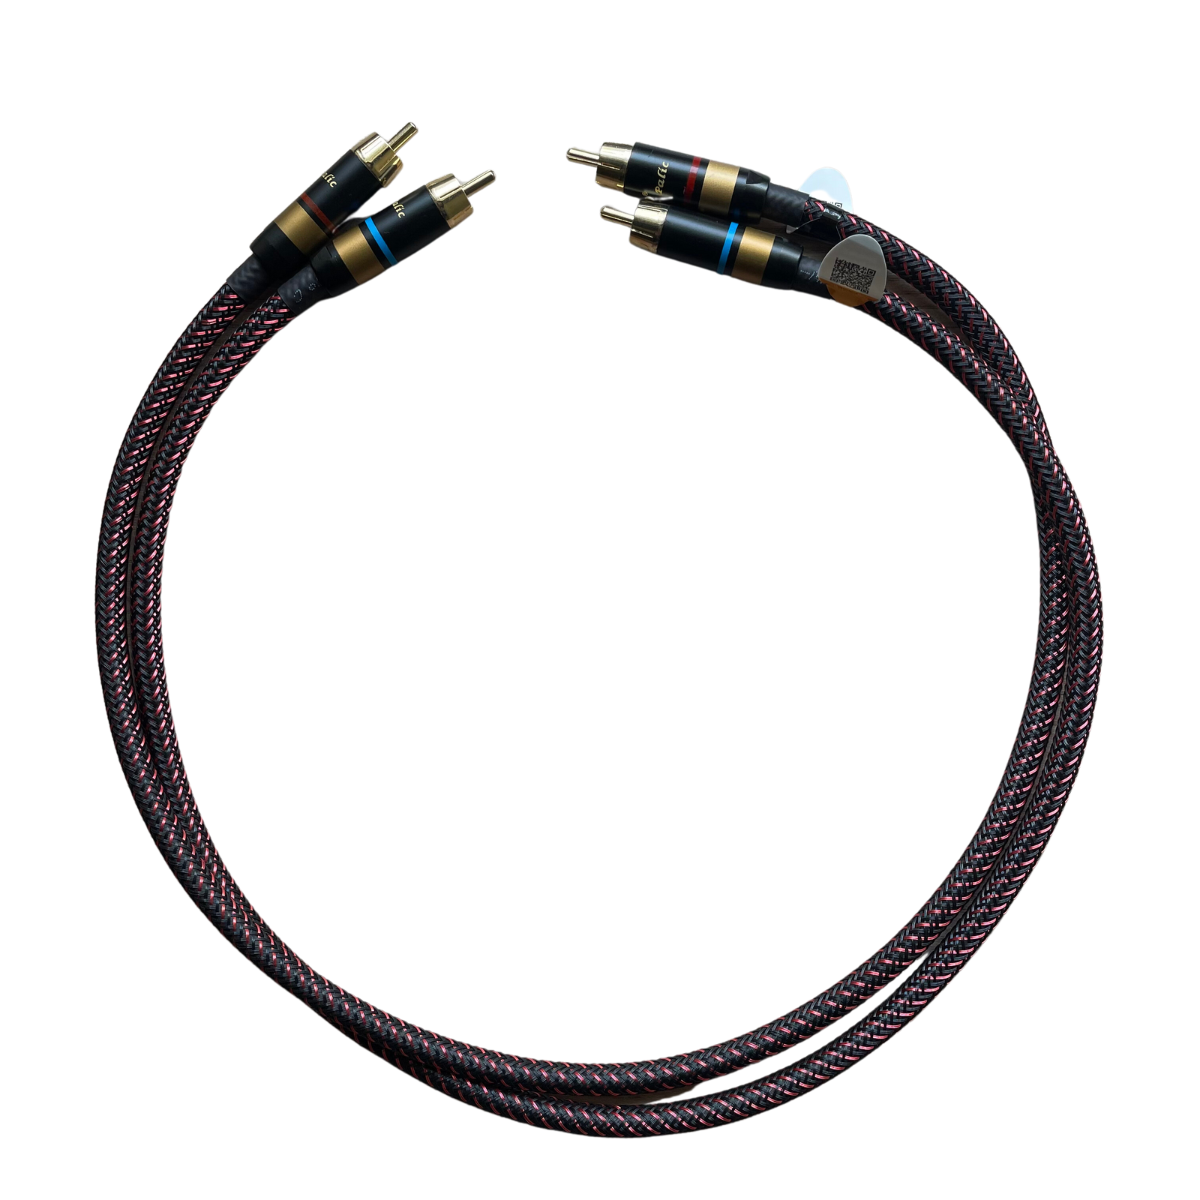 EarAudio Premium RCA Male To RCA Male Interconnects Cable